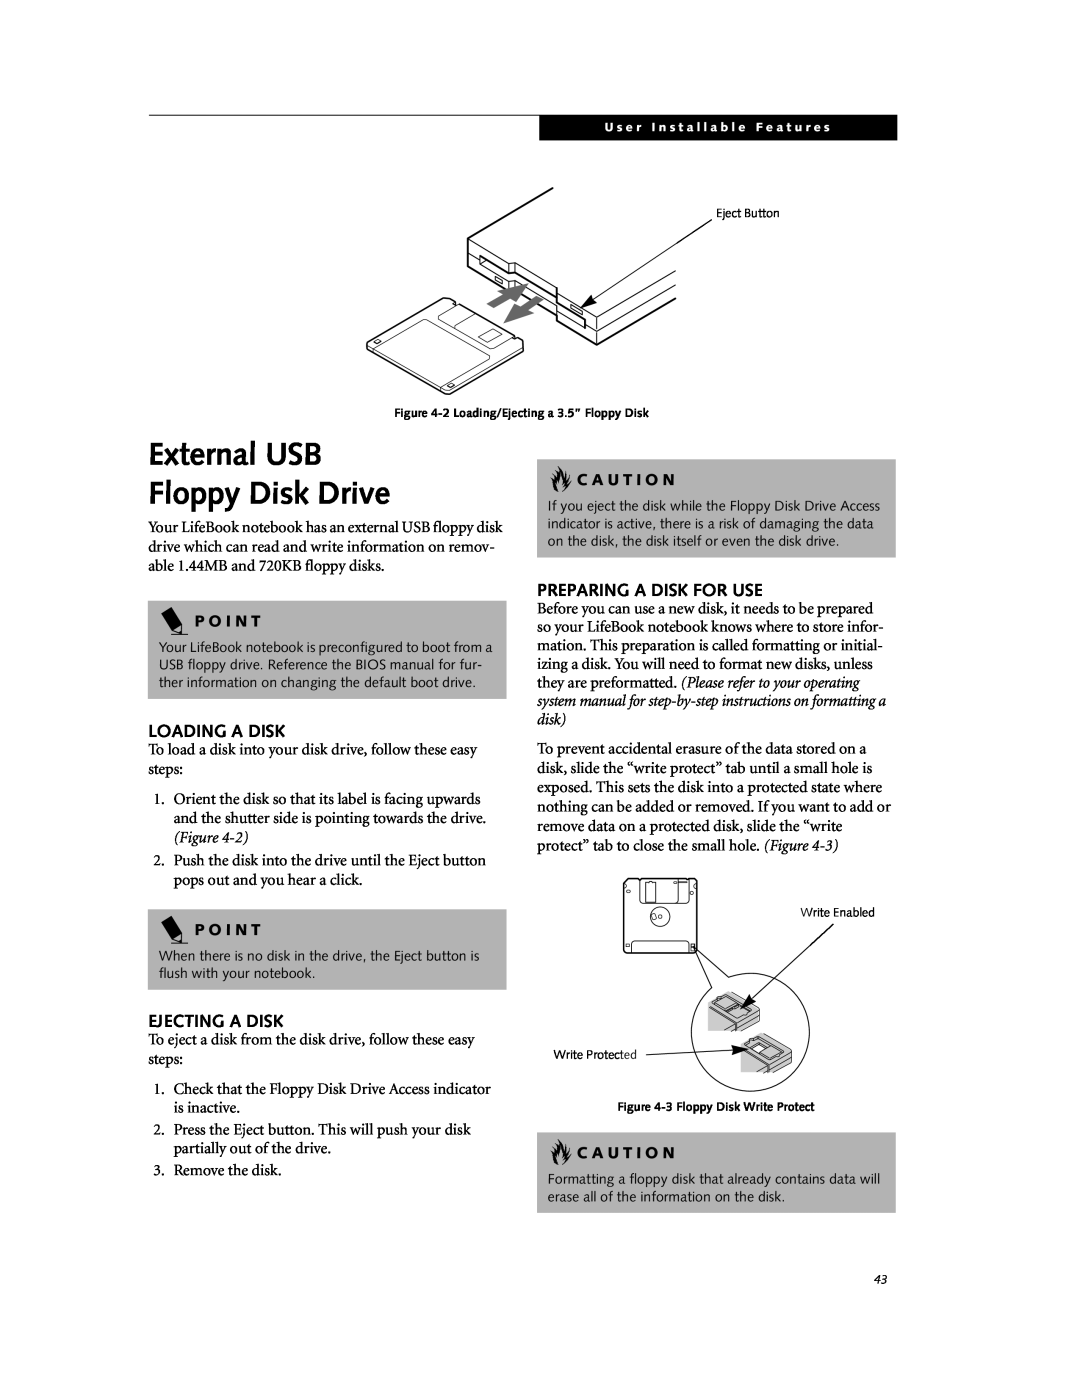 Fujitsu DVD Player External USB Floppy Disk Drive, Loading A Disk, Ejecting A Disk, Preparing A Disk For Use, P O I N T 